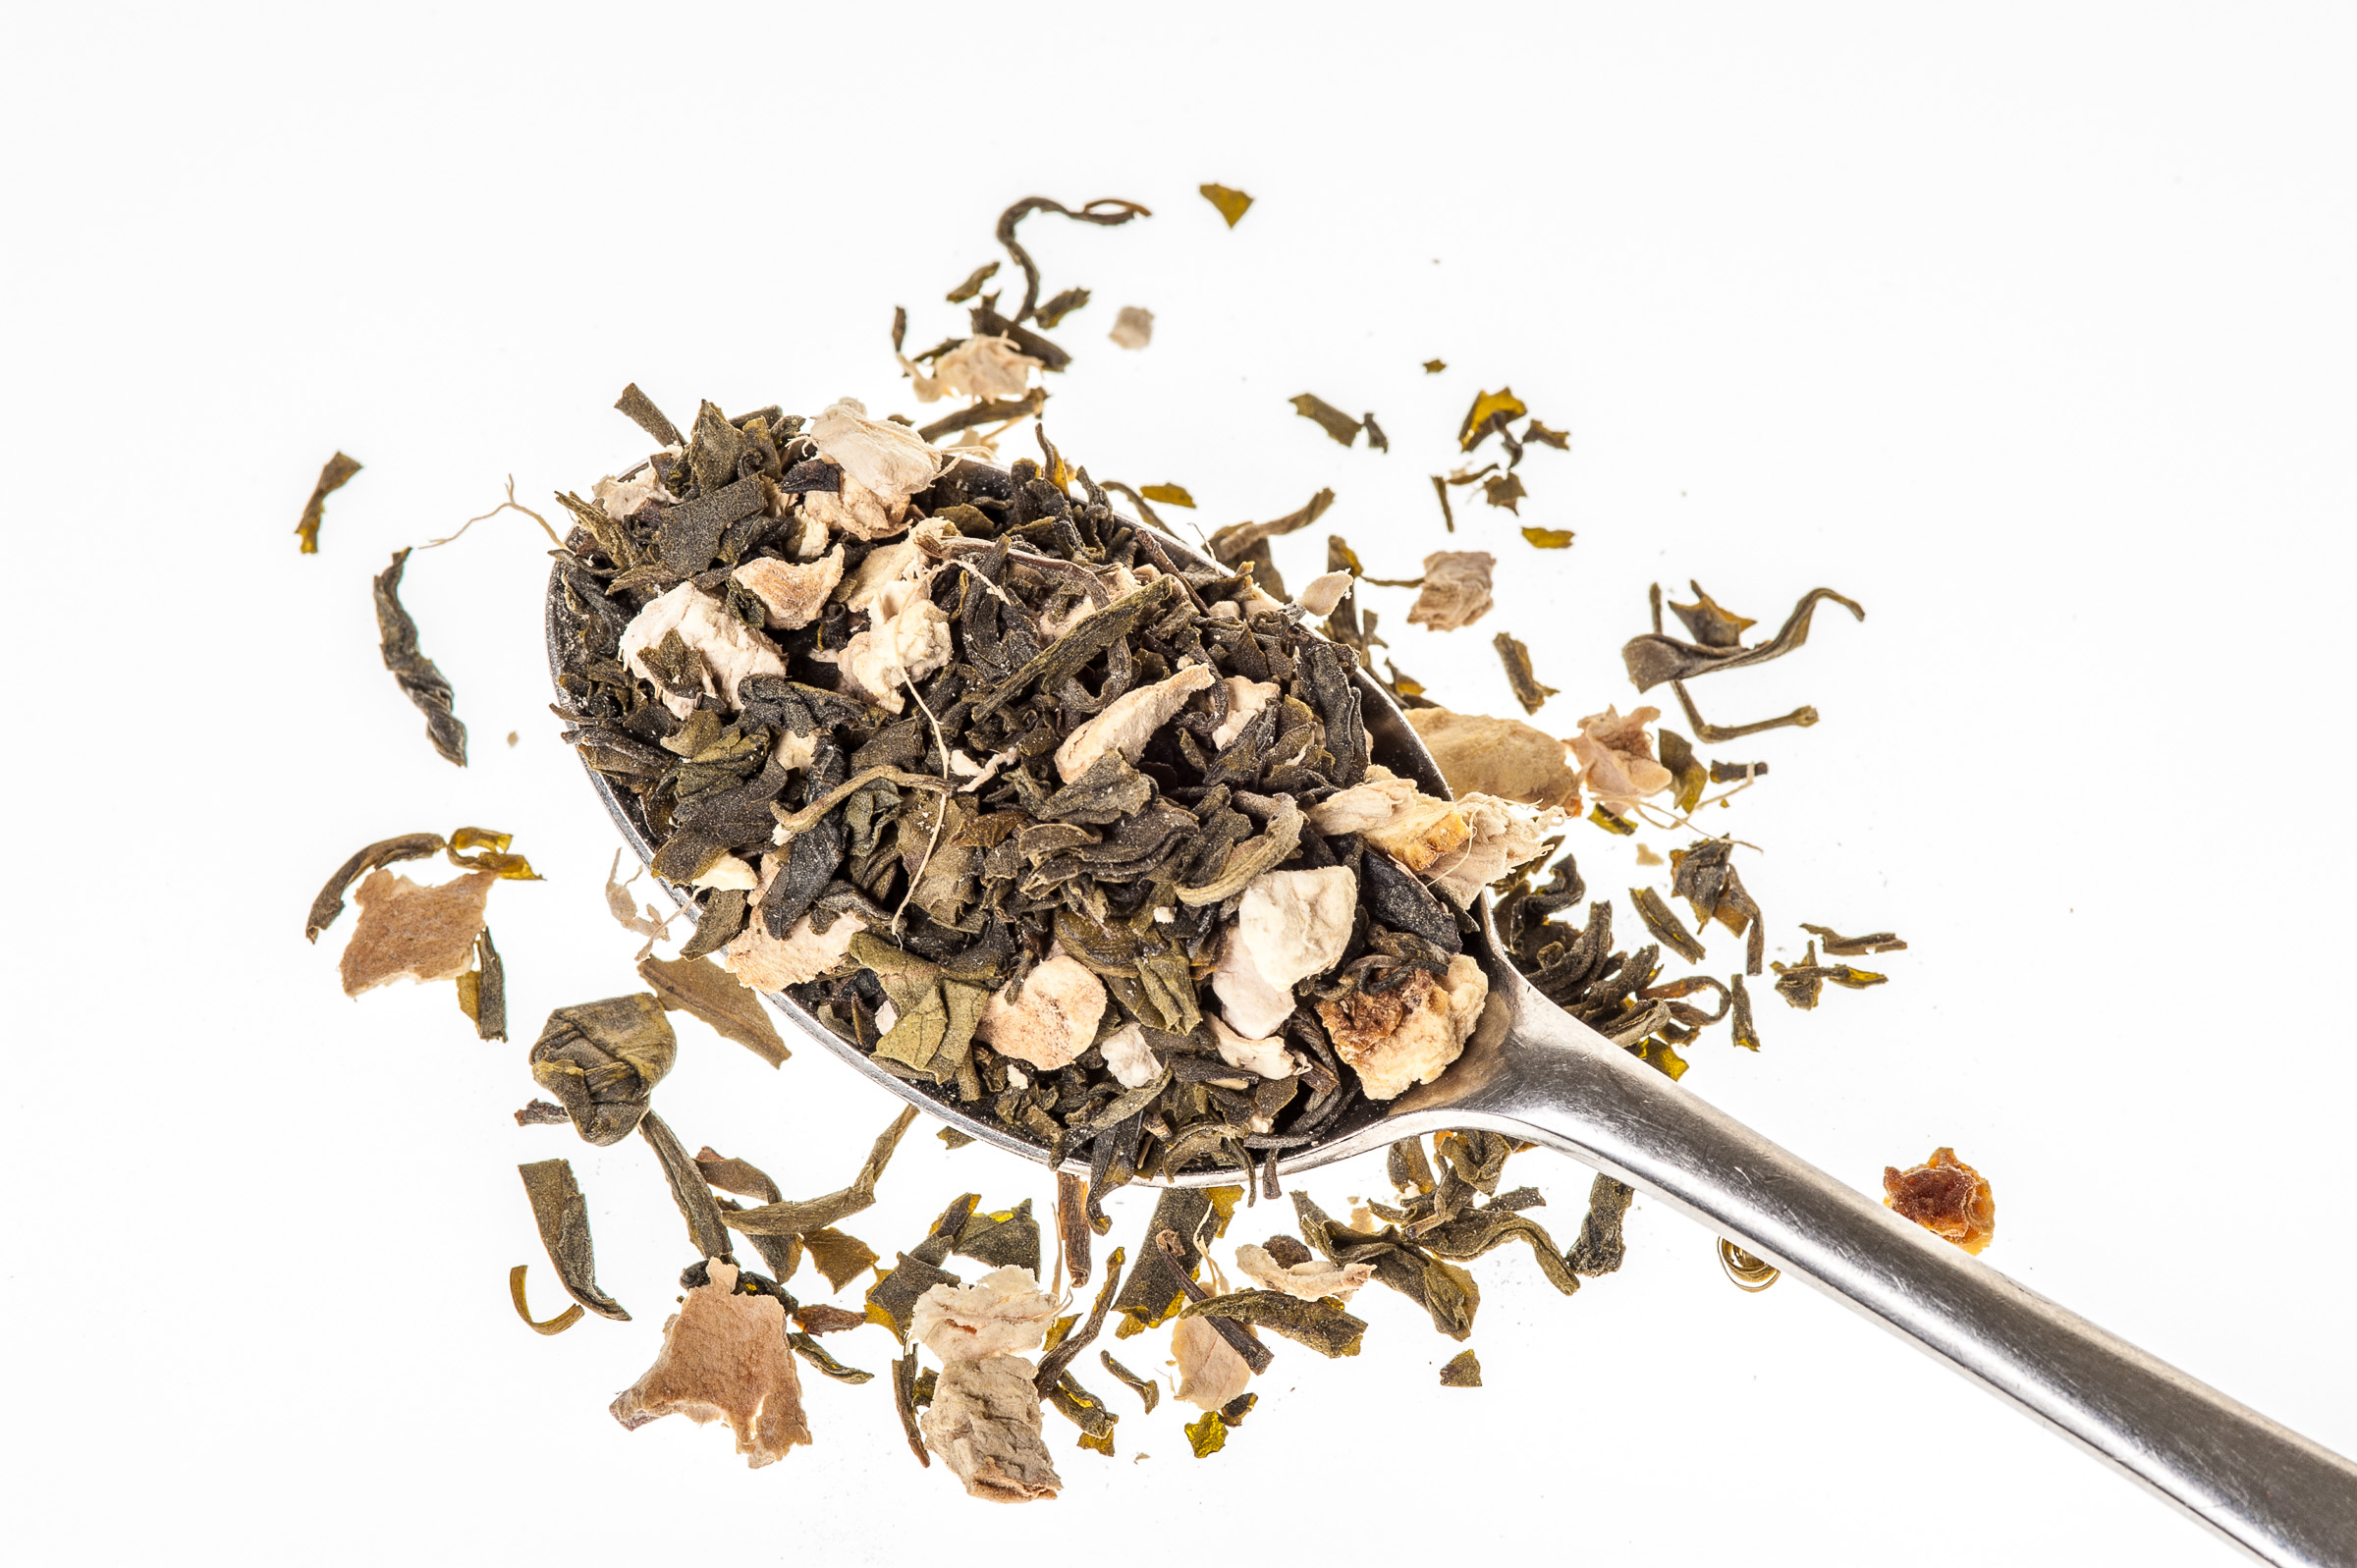 The Science Behind the “Teatox”